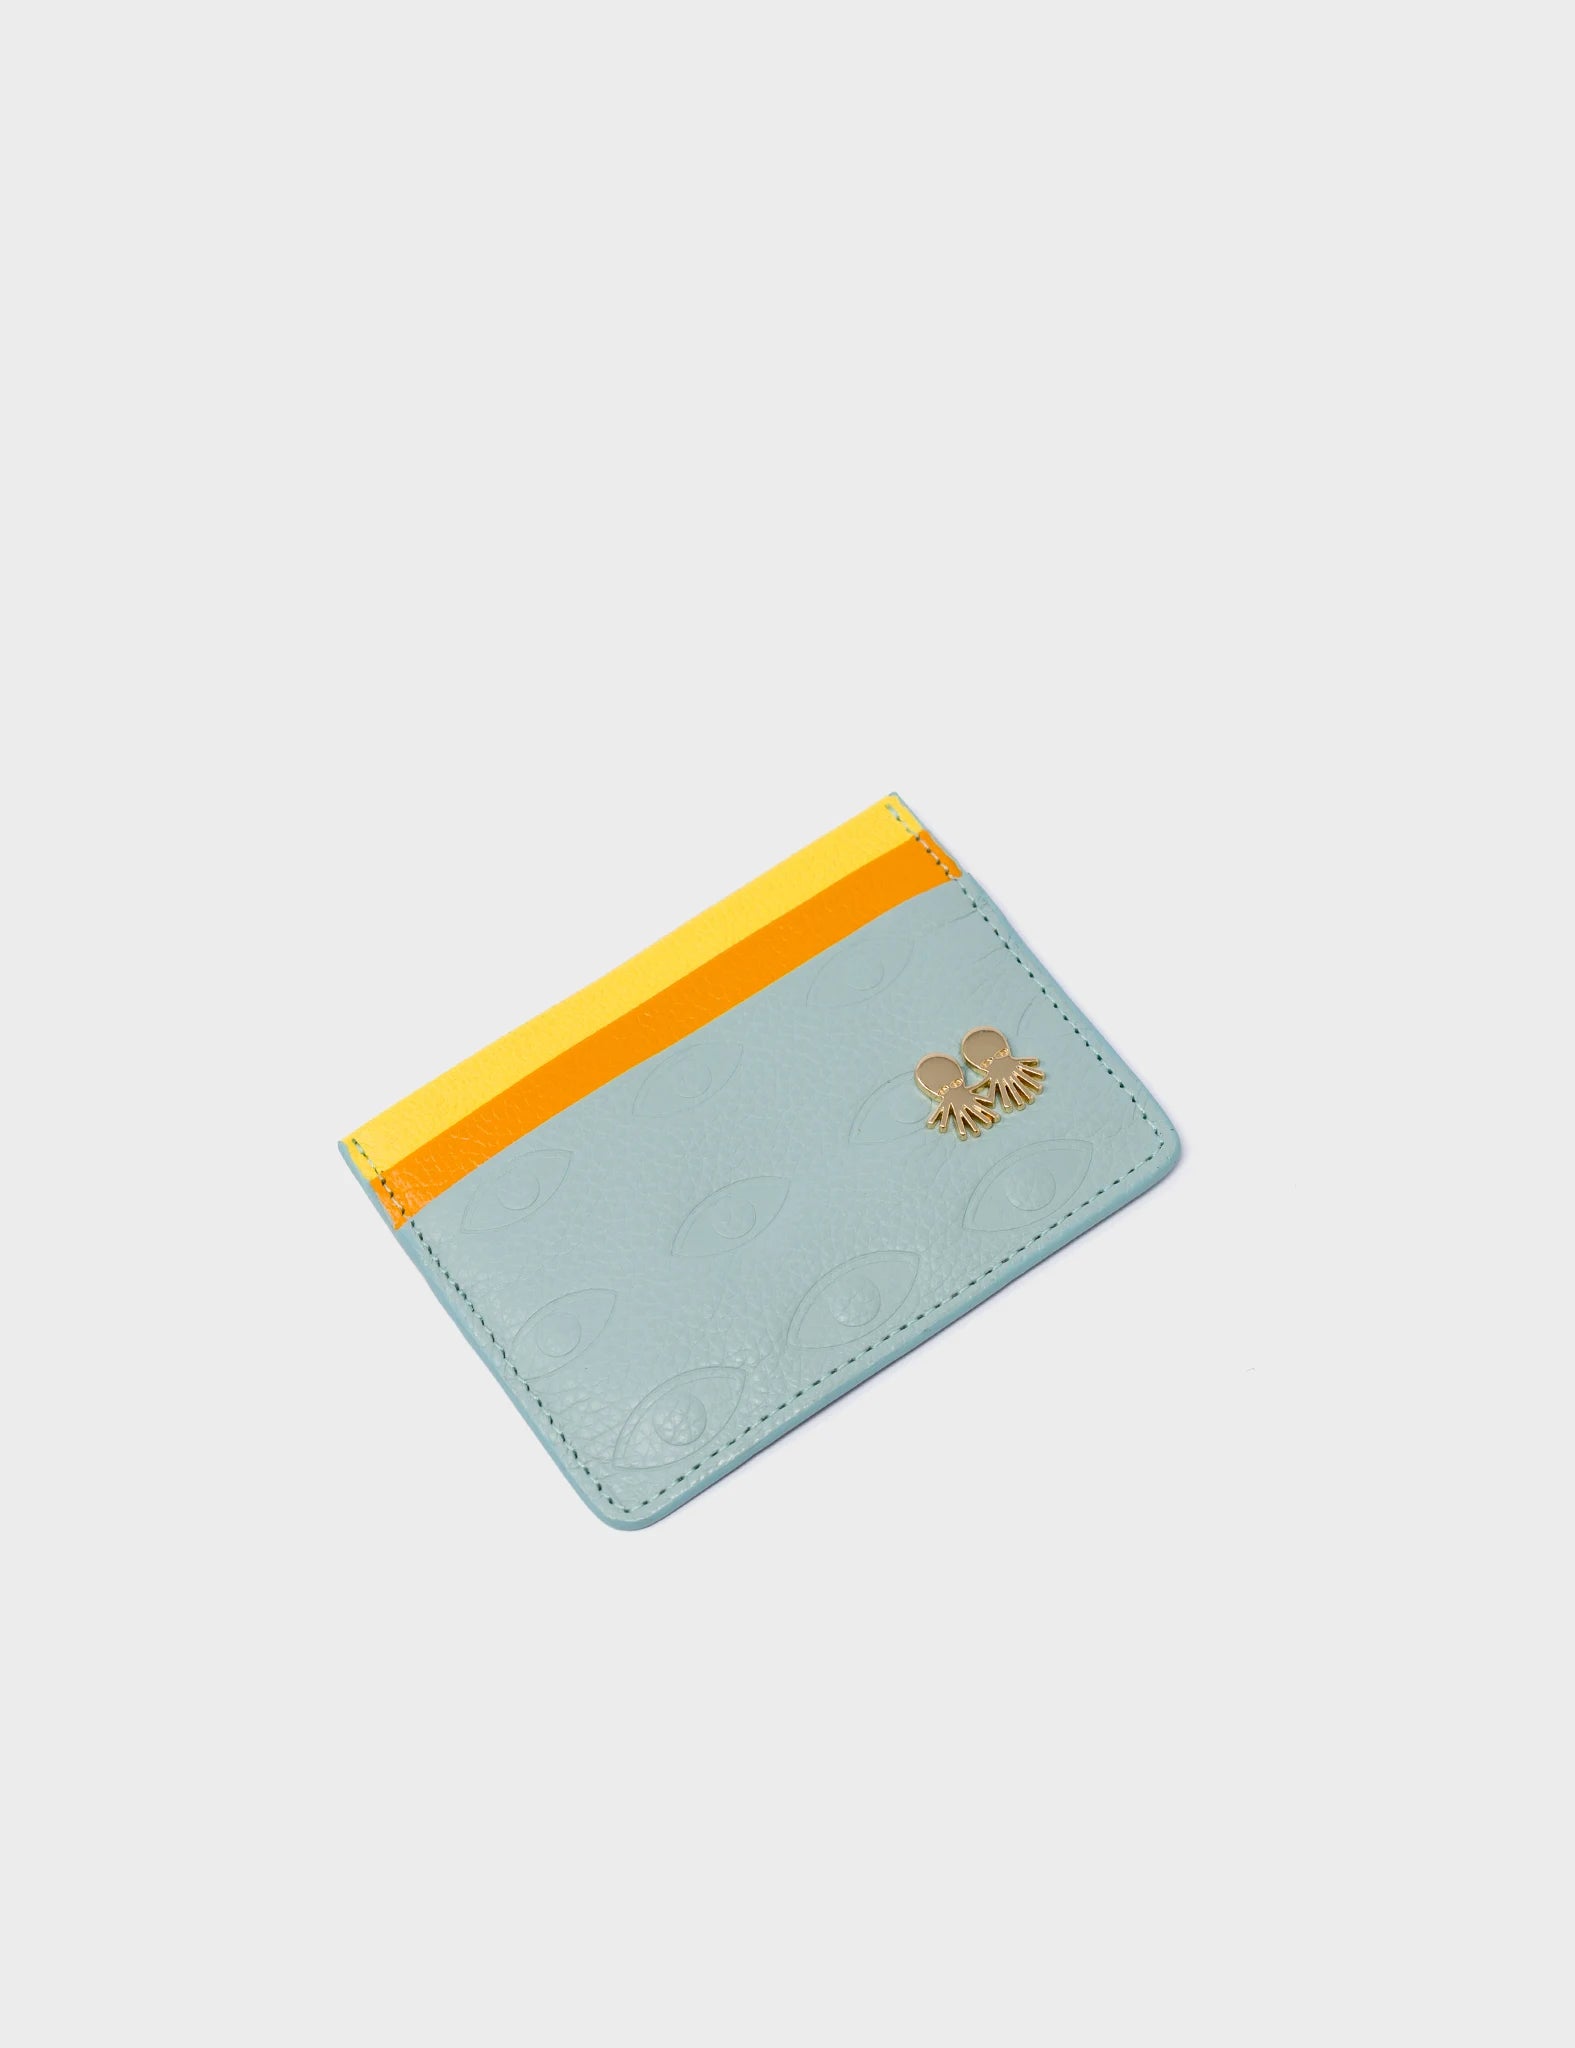 Cameo Blue And Marigold Leather Cardholder - Eyes Pattern Debossed - side